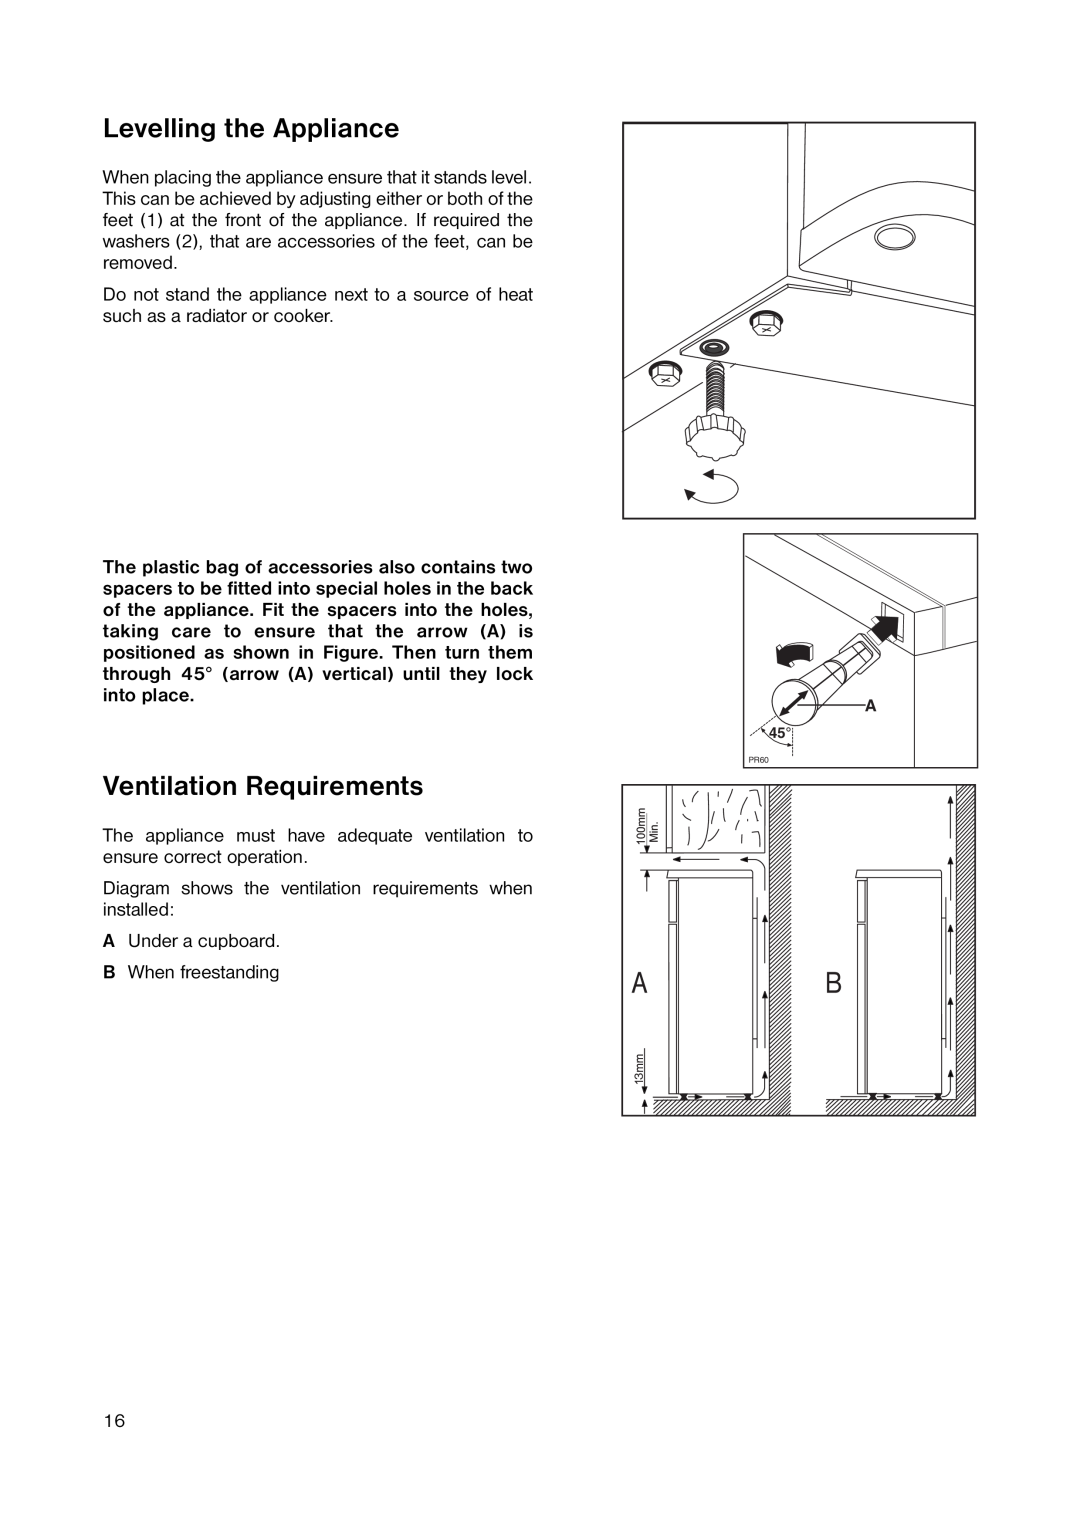 Zanussi ZRD 1845 manual Levelling the Appliance, Ventilation Requirements 